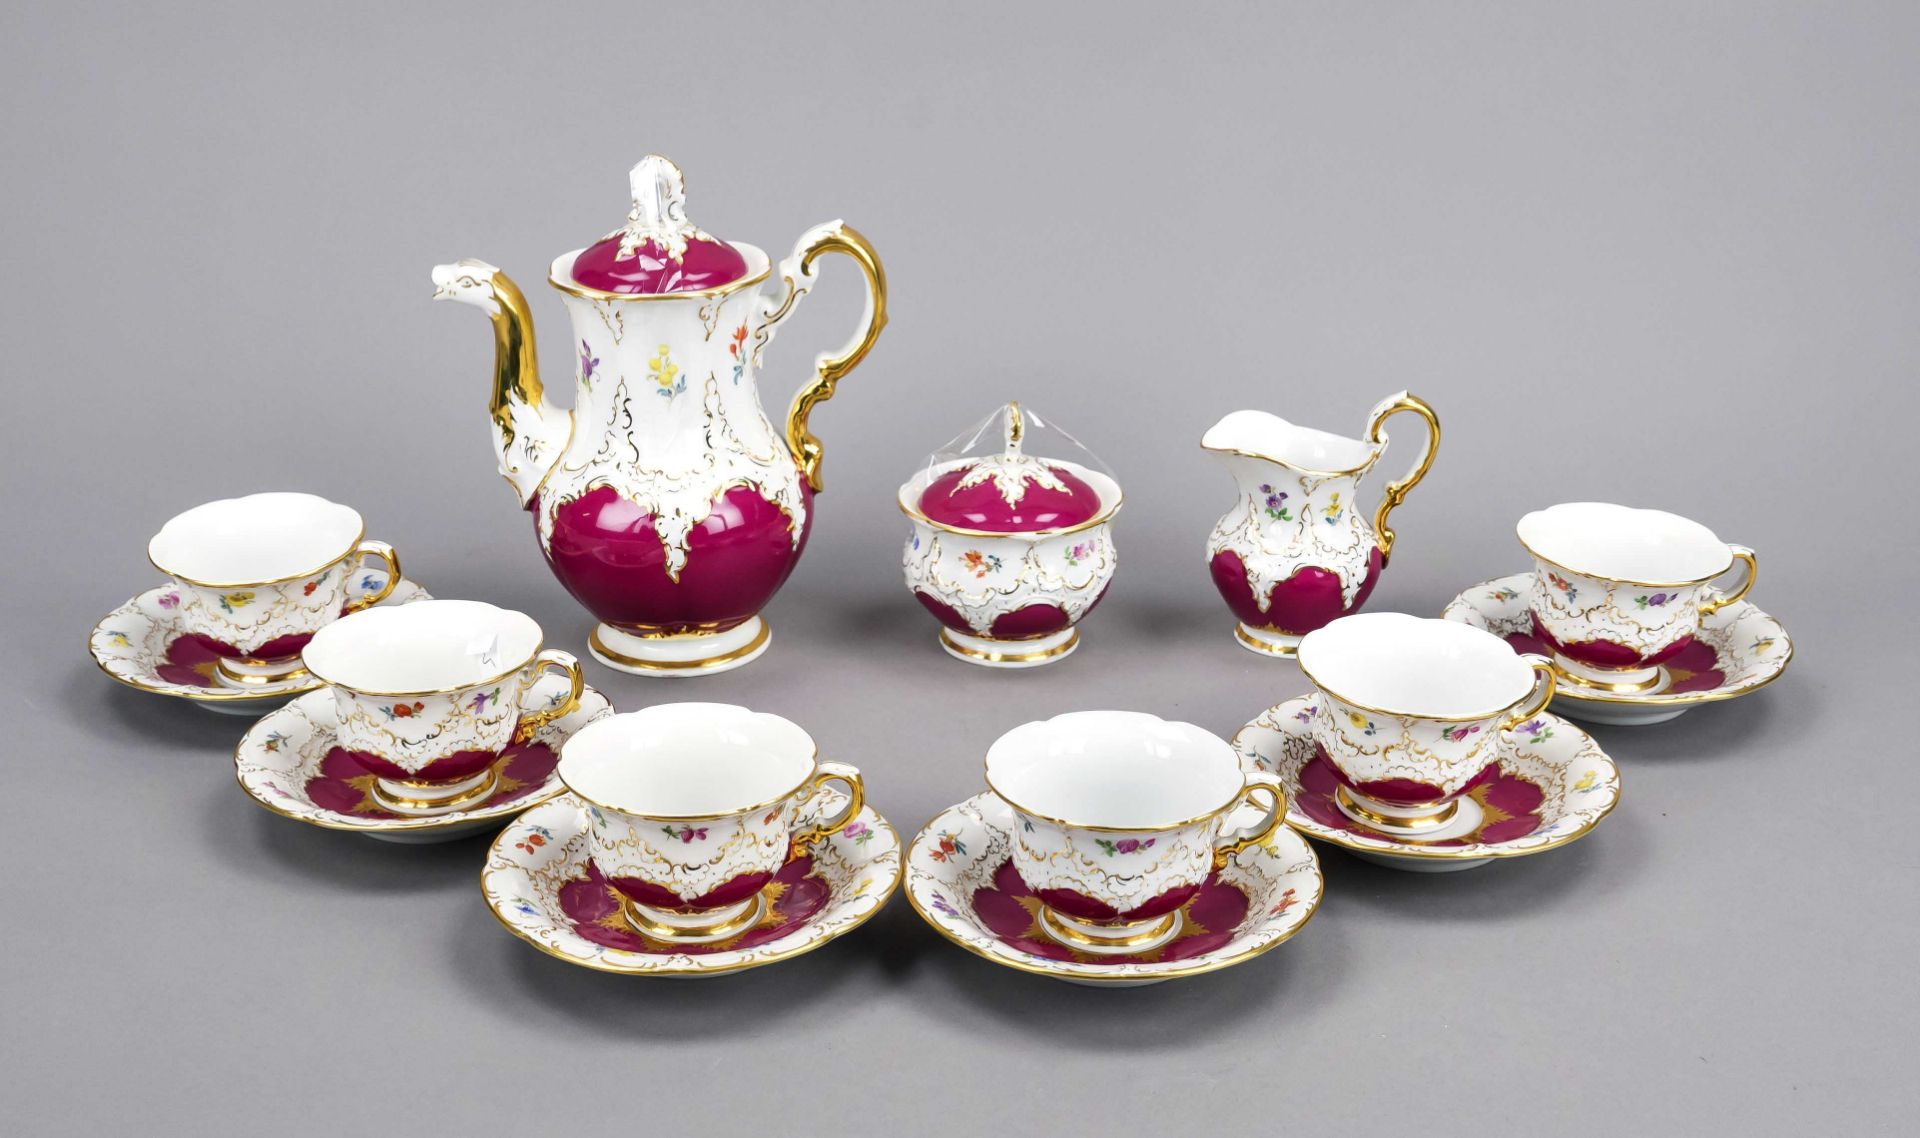 Stately mocha service for six persons, 15-piece, Meissen, 2nd half of the 20th century, 1st